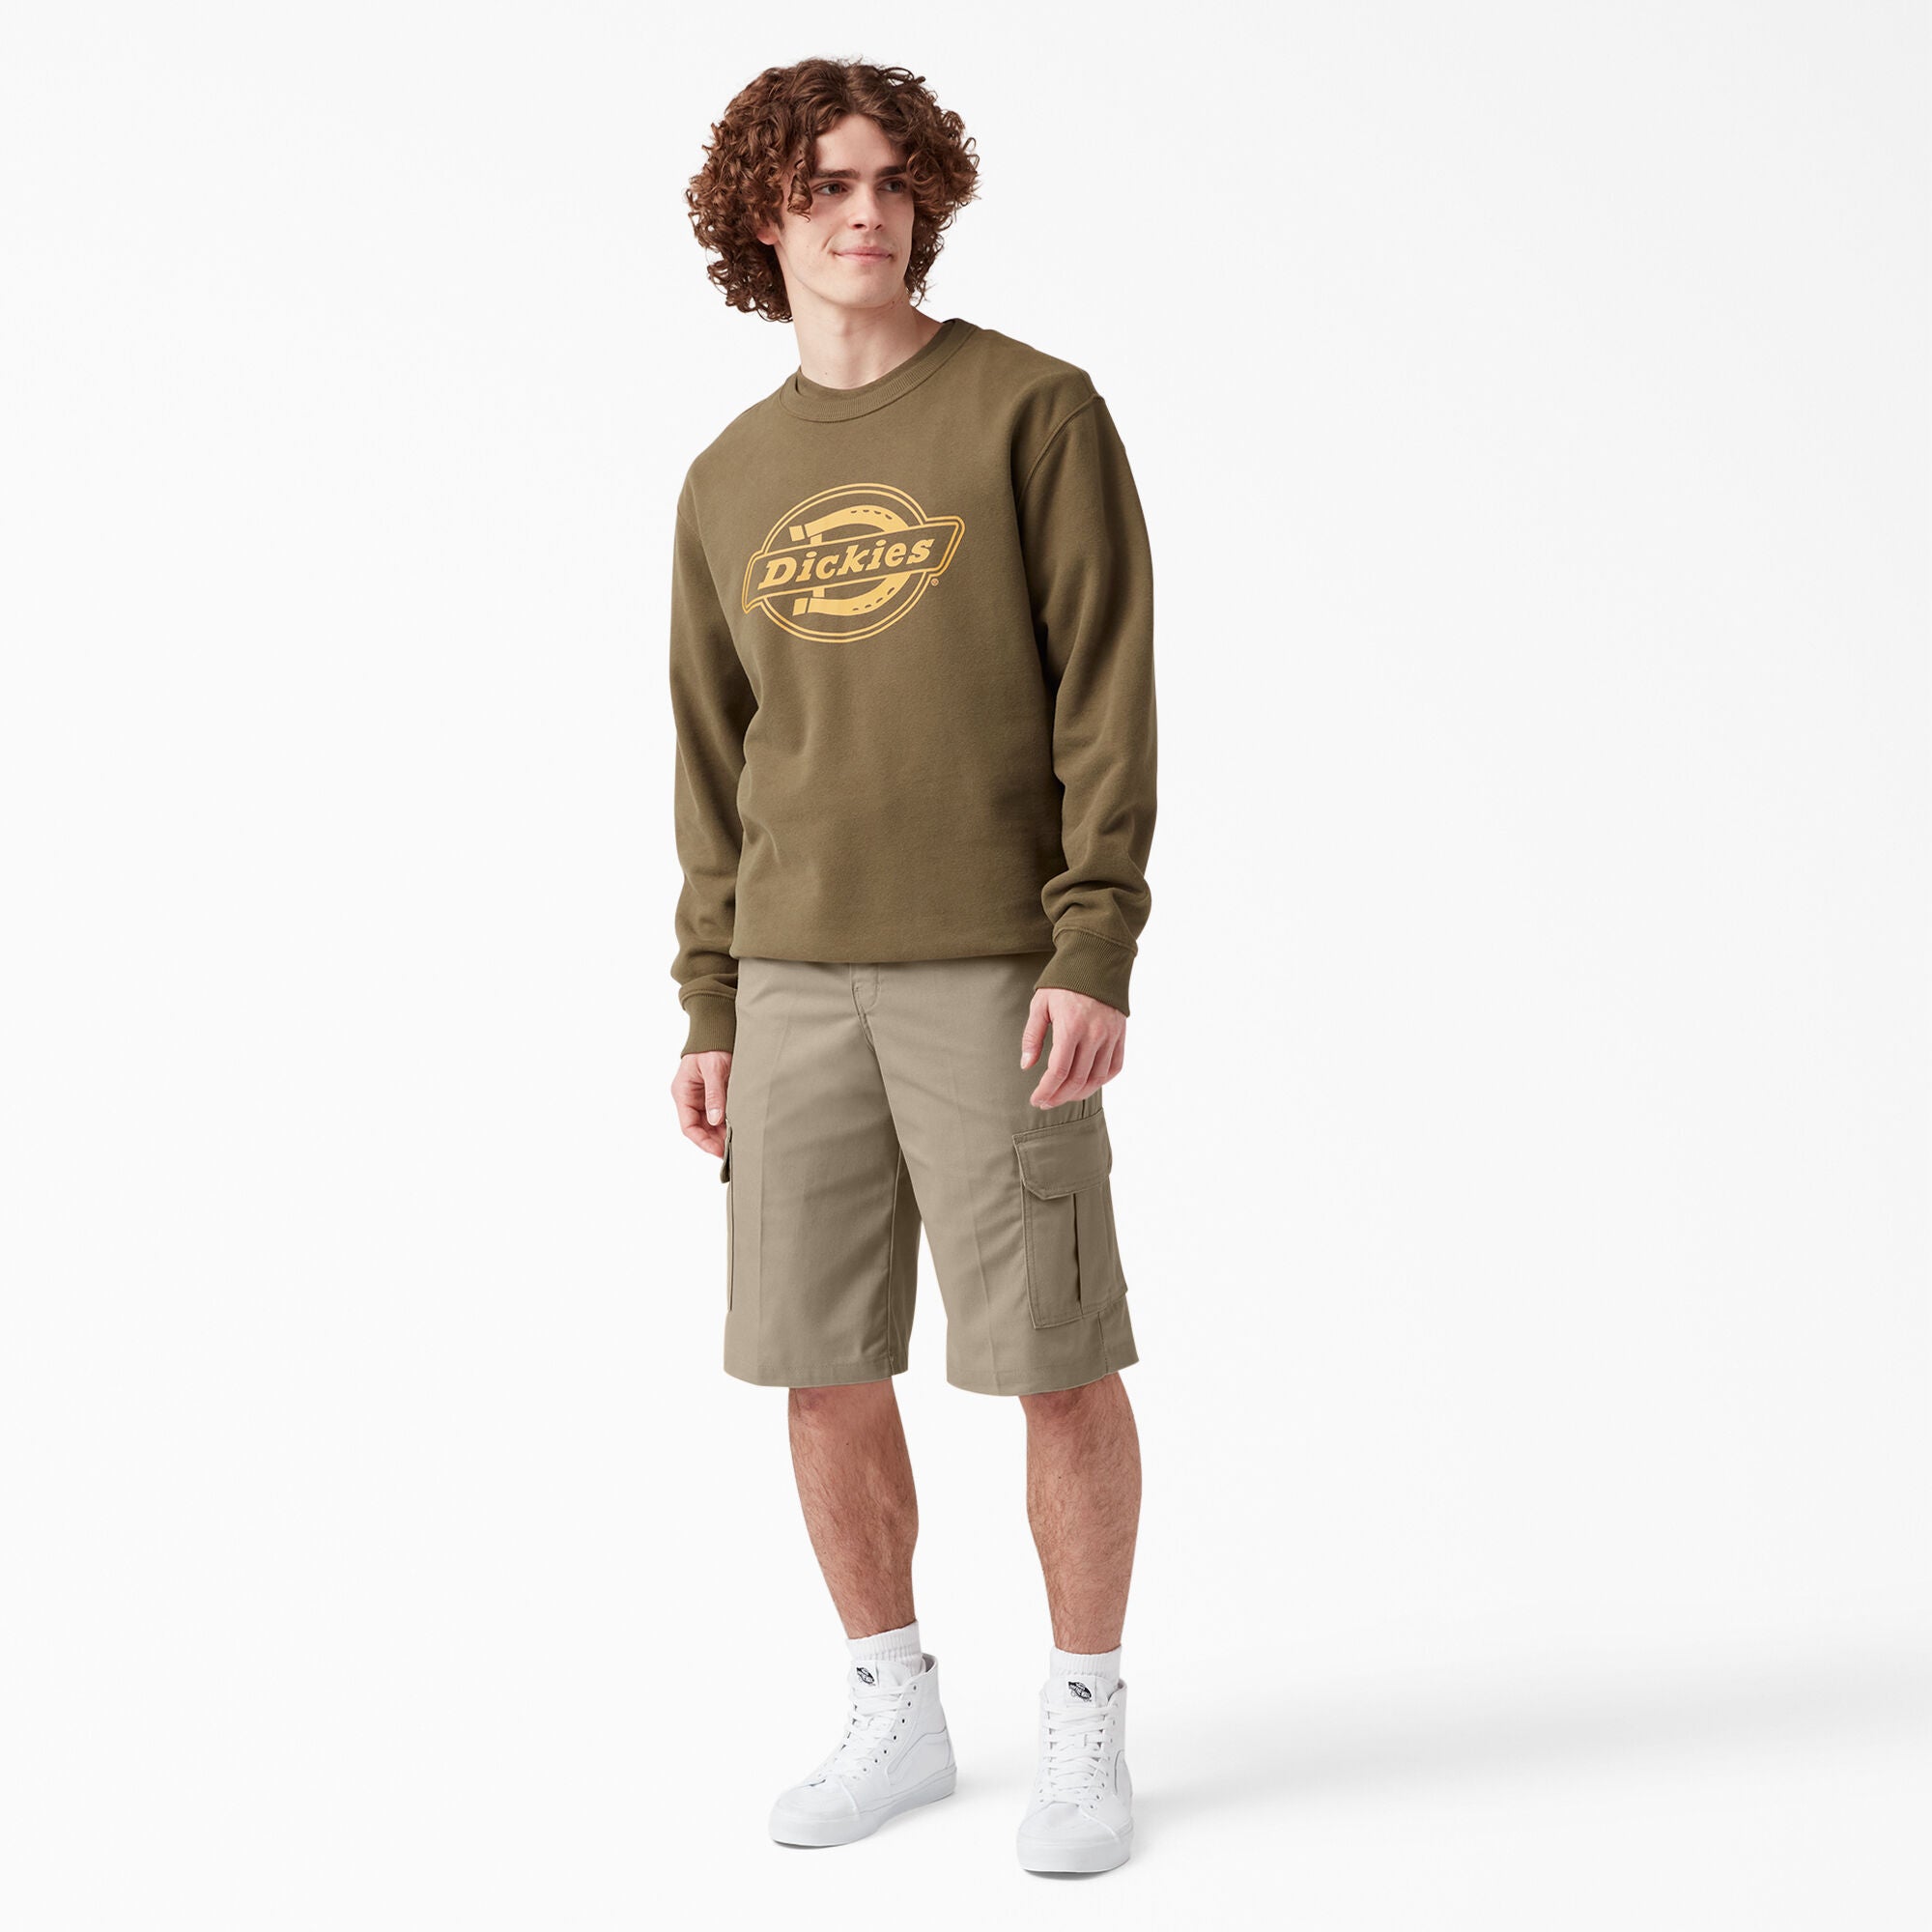 Dickies Relaxed Fit Cargo Shorts, 13", Desert Sand